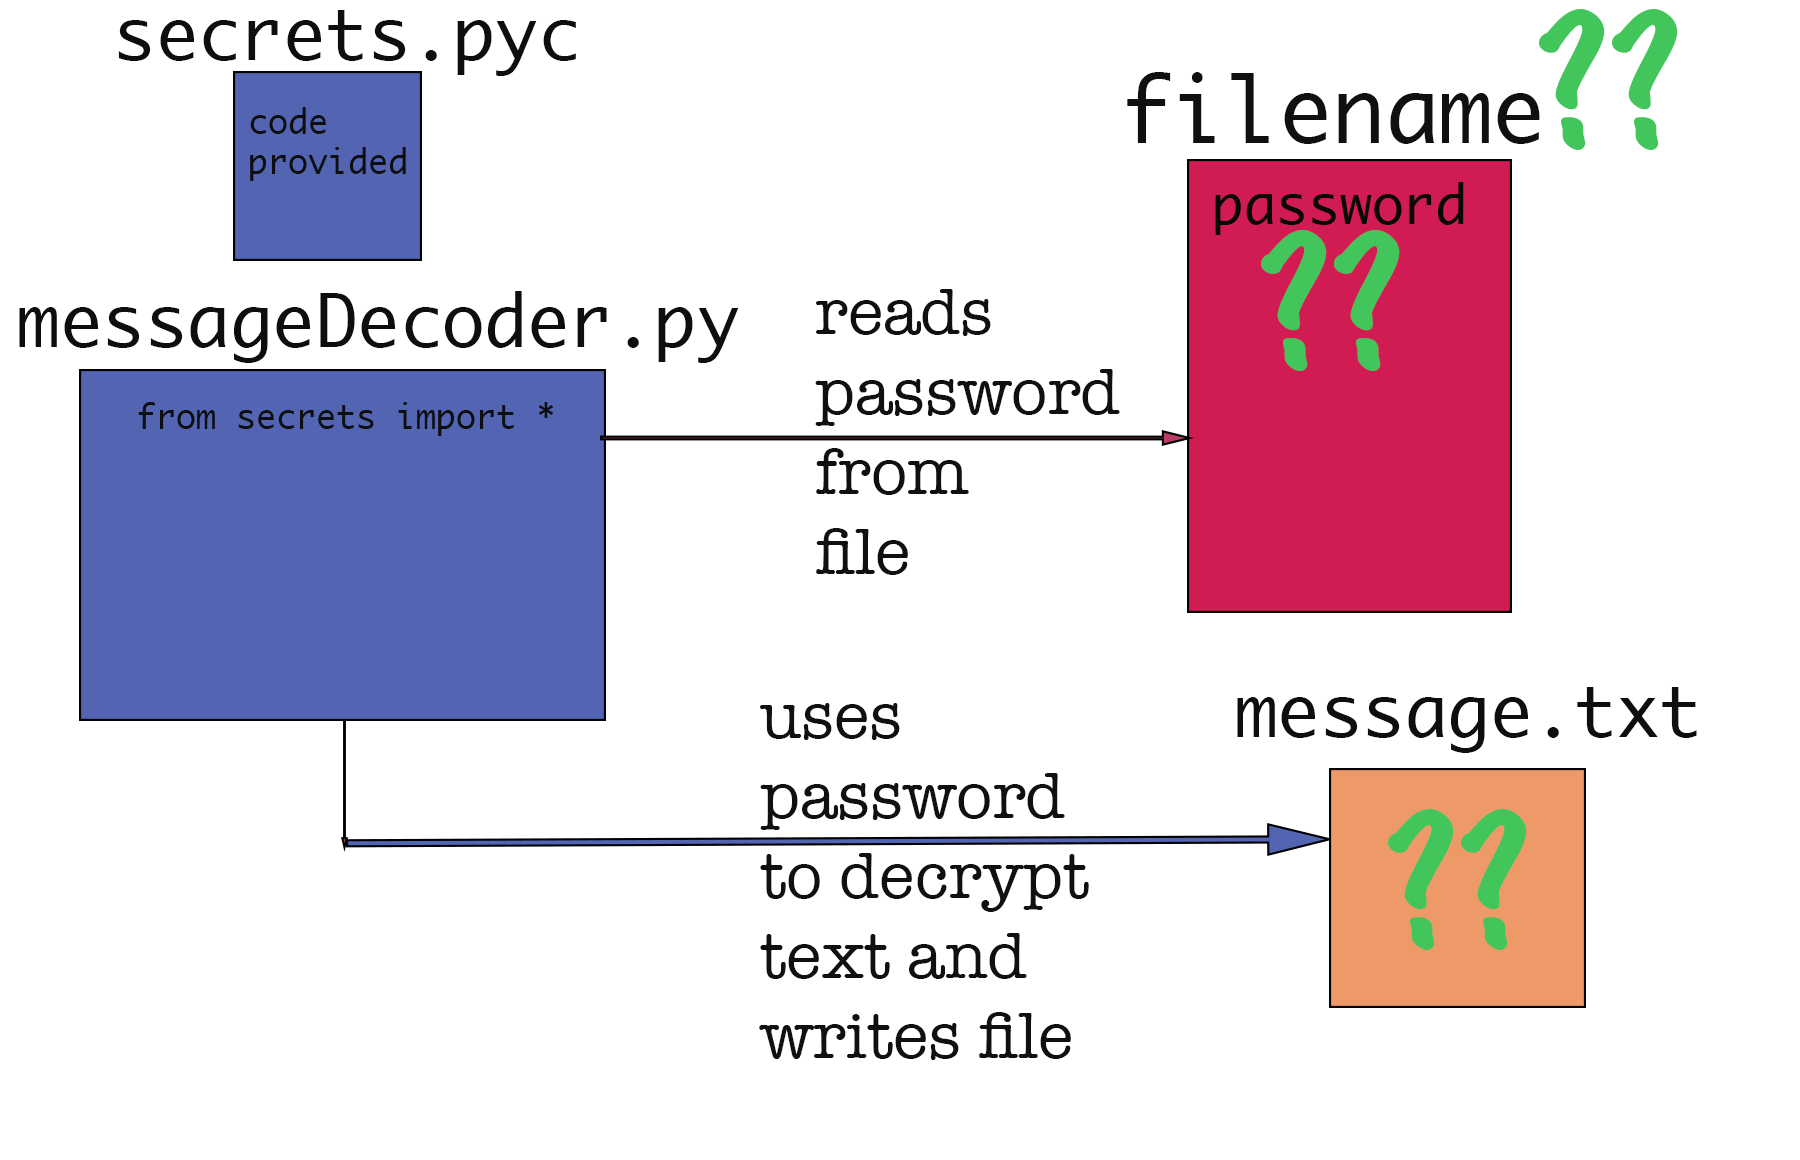 A diagram of the task at hand. It shows a box representing messageDecoder.py and
another box representing the provided secrets.pyc. Arrows extend from the messageDecoder box to indicate that a file should be read and the file contains a password. Green question marks indicate parts the user must figure out or generate. There is also an orange box labeled message.txt, which is generated if the right file and the right password are created.